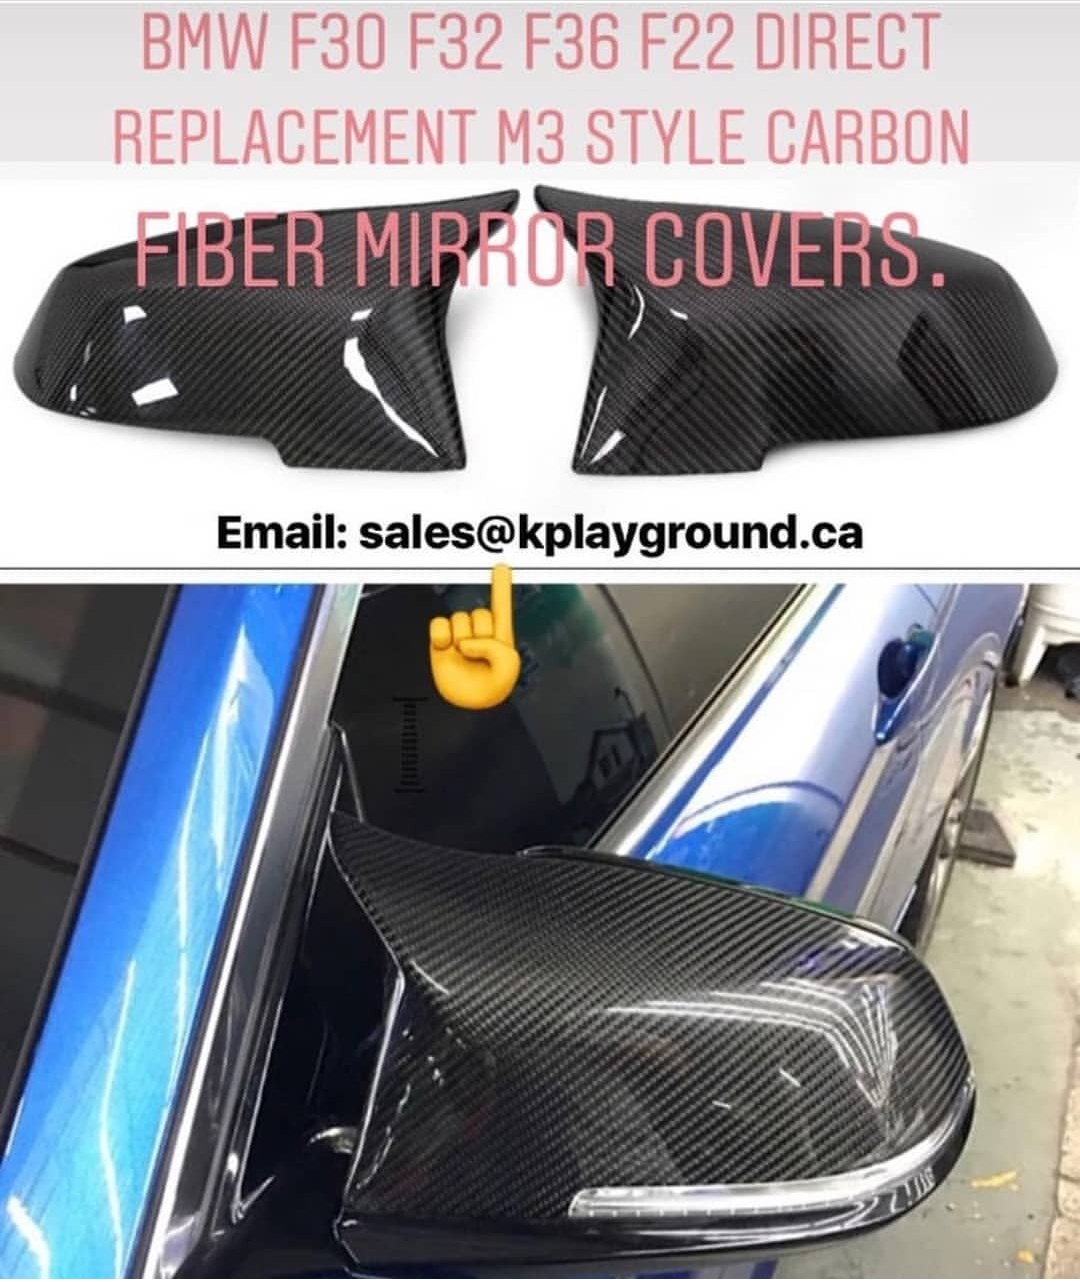 Direct Replacement M3 Style Carbon Fiber Mirror Covers